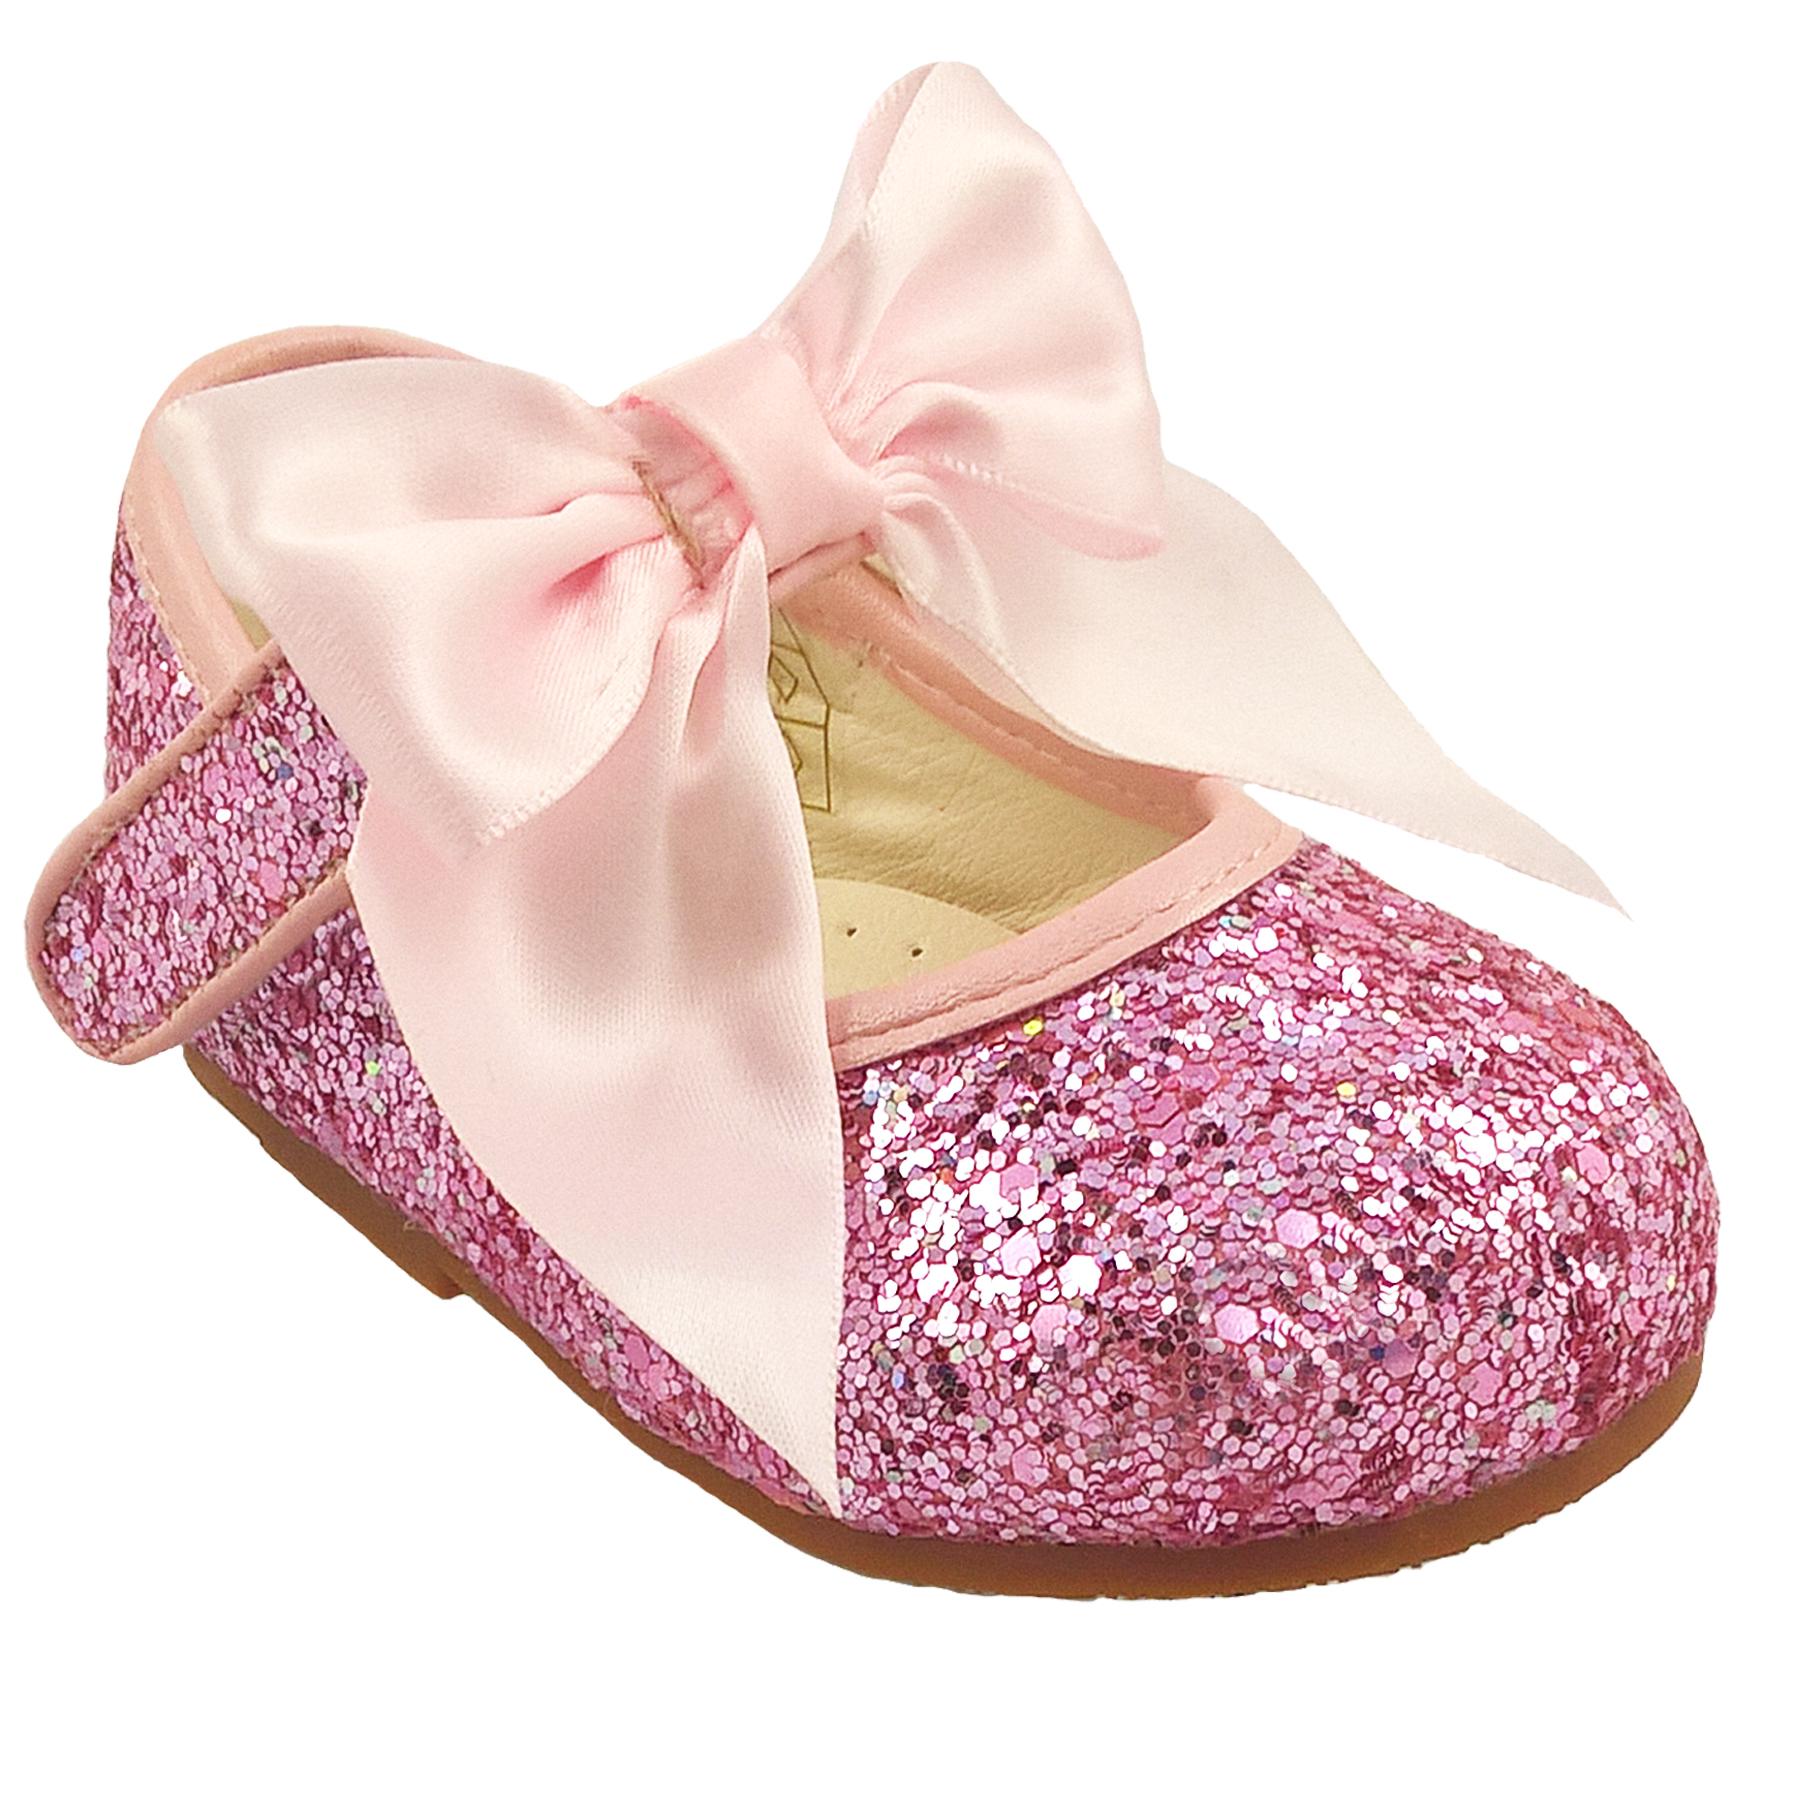 Tia London 8511 Pink Glitter Bow Shoes